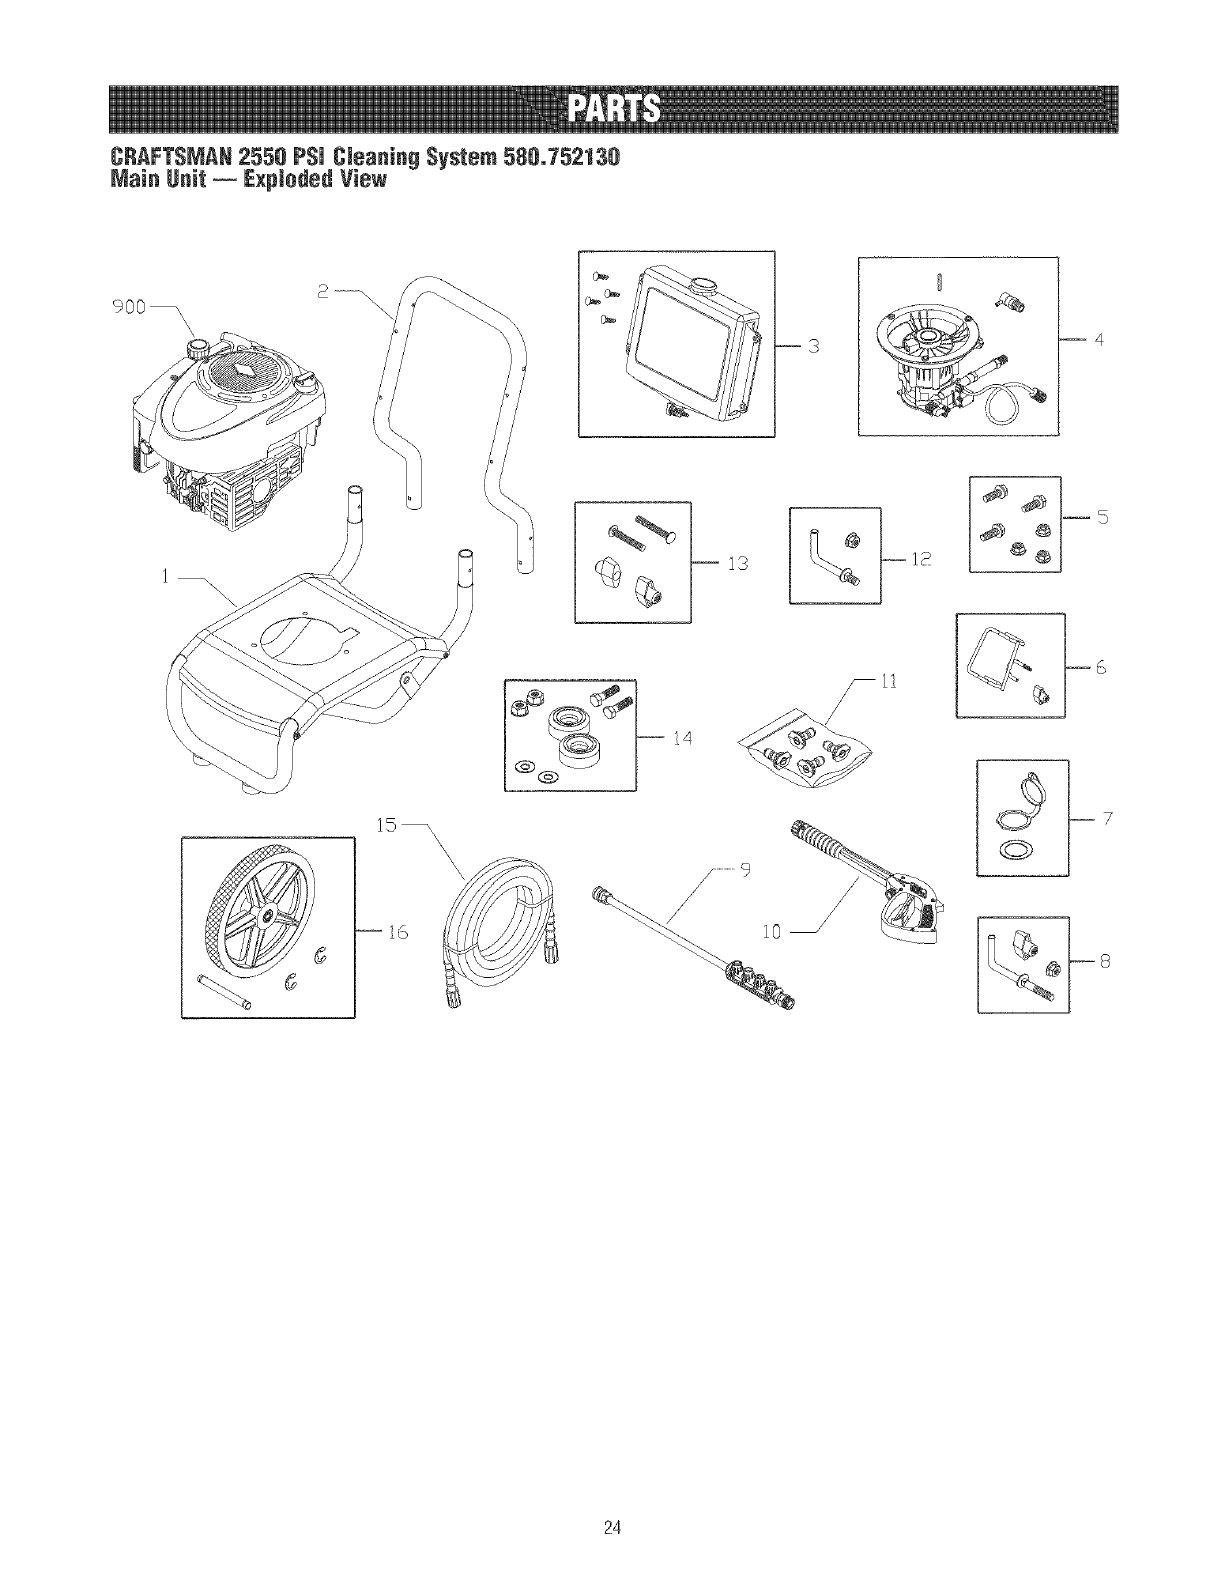 Page 24 of Craftsman Pressure Washer 580.75213 User Guide